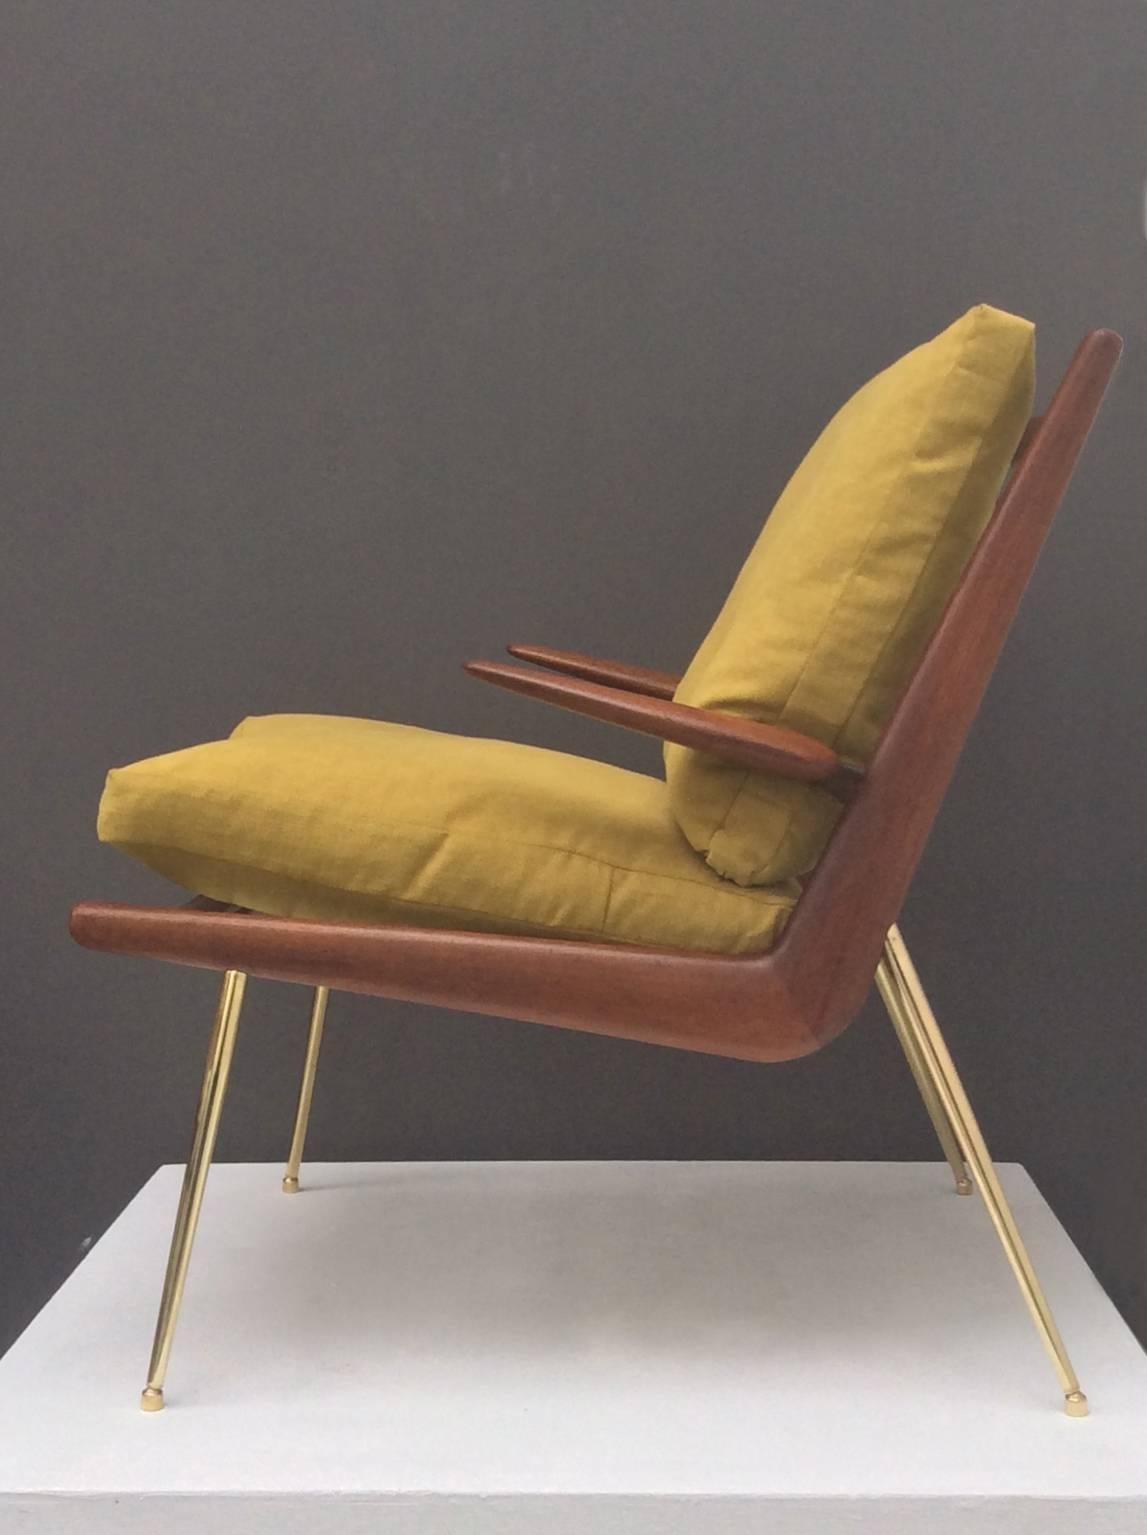 Boomerang chair by Peter Hvidt & Orla Mølgaard for France & Sons, Denmark, 1950s.

The frame of this elegant chair is made of teak with brass legs and all original self-levelling feet. New upholstery in soft cotton/linen with feather cushions and